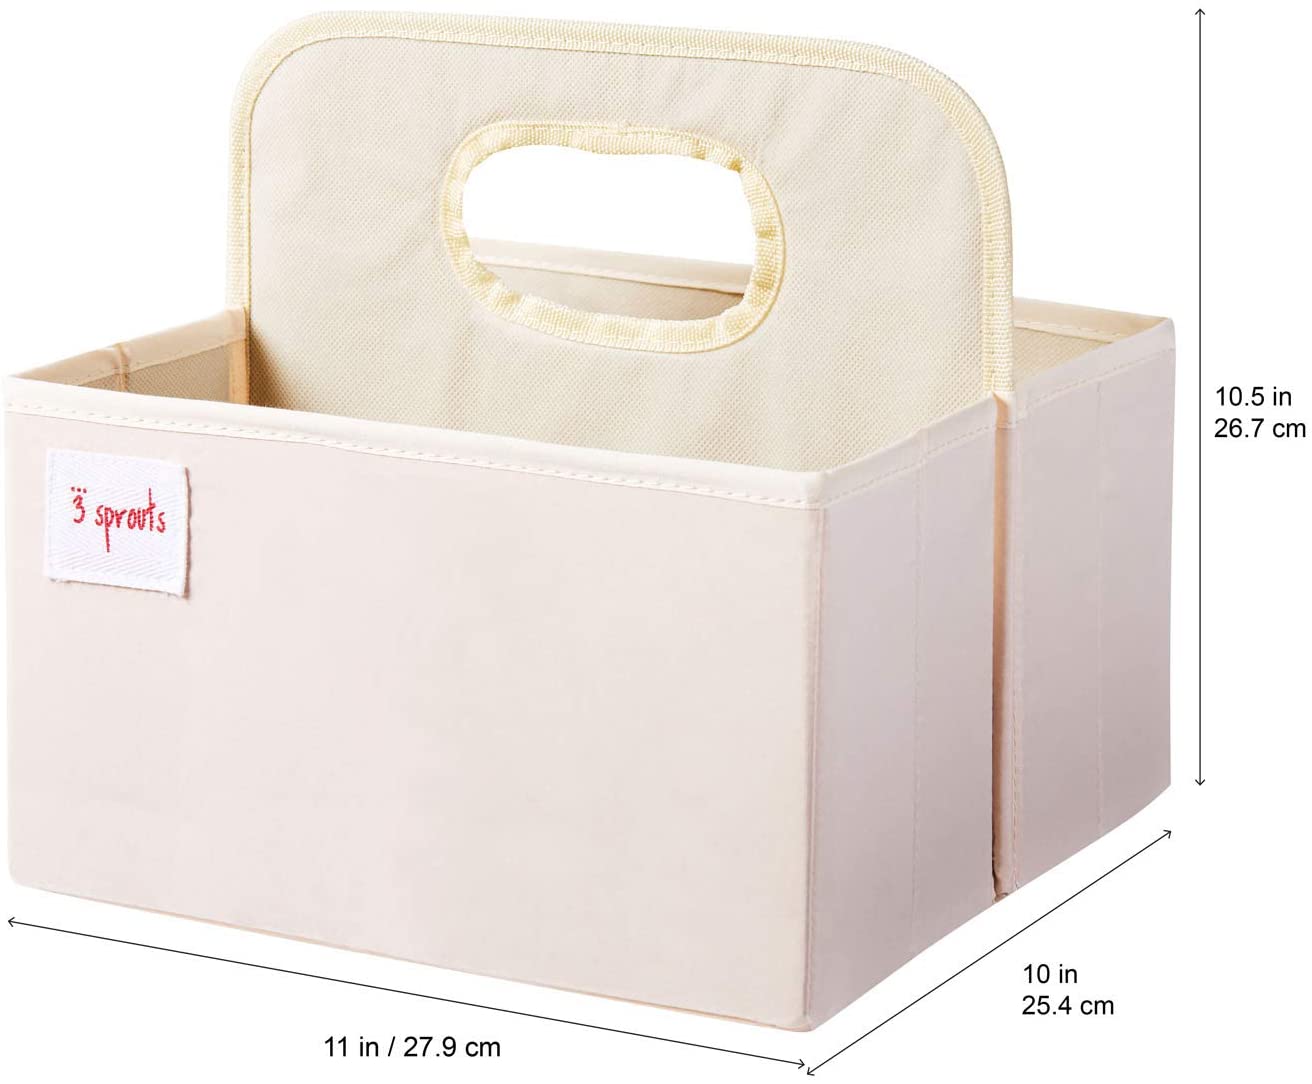 3 SproutsBaby Nappy Caddy - Organiser Basket for NurseryColour Name: Whalefurniture storageEarthlets